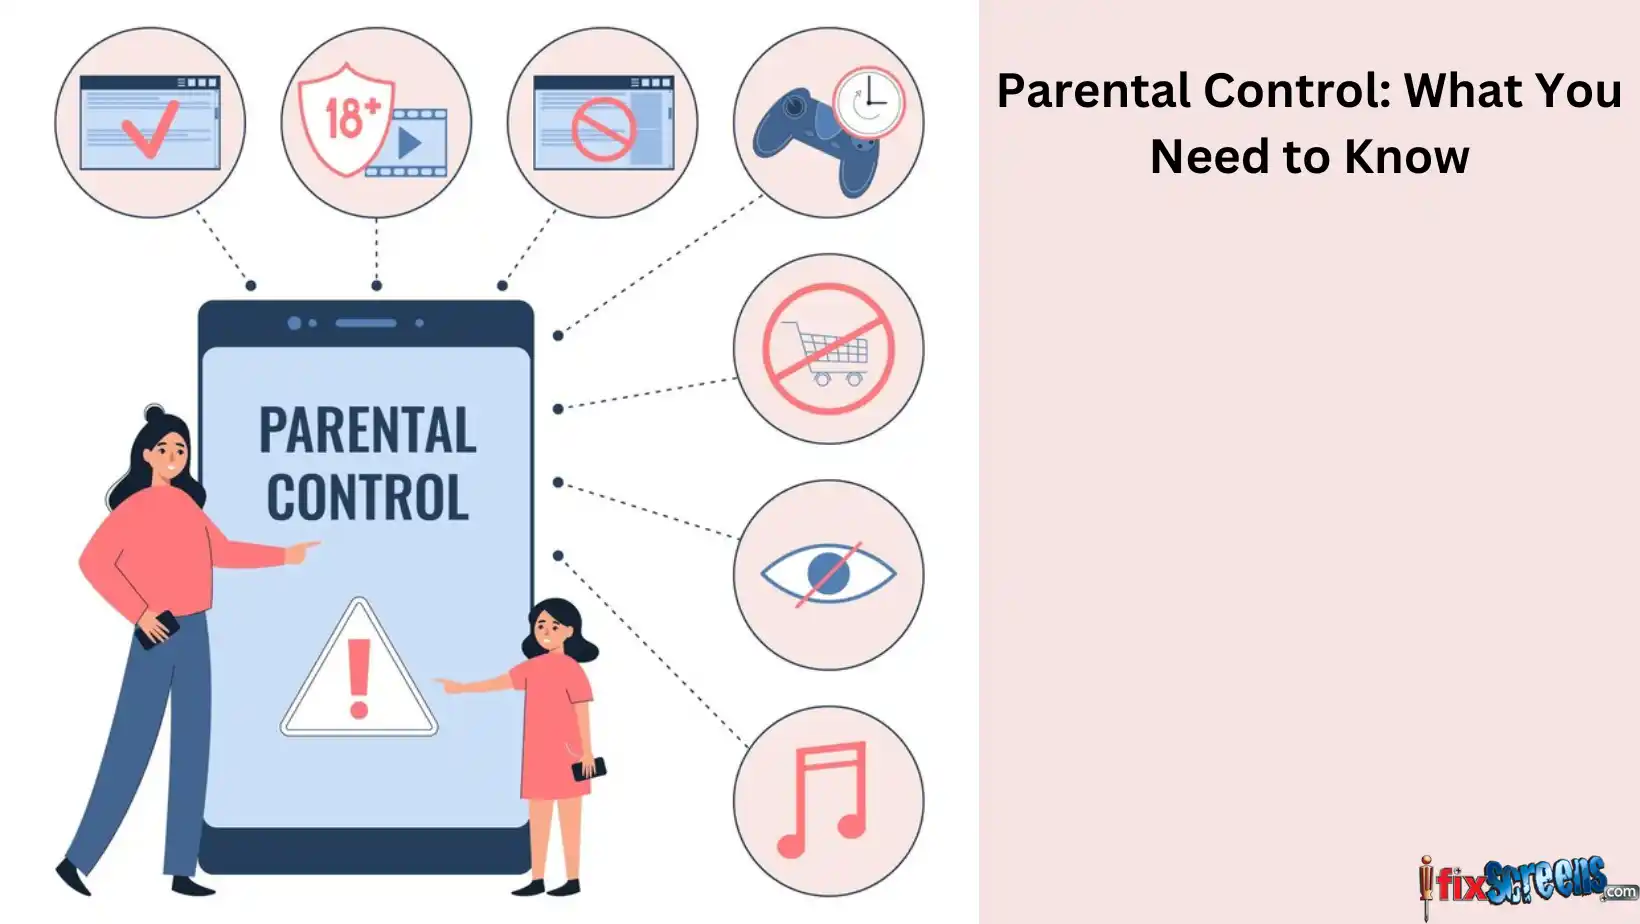 Parental Control: What You Need To Know